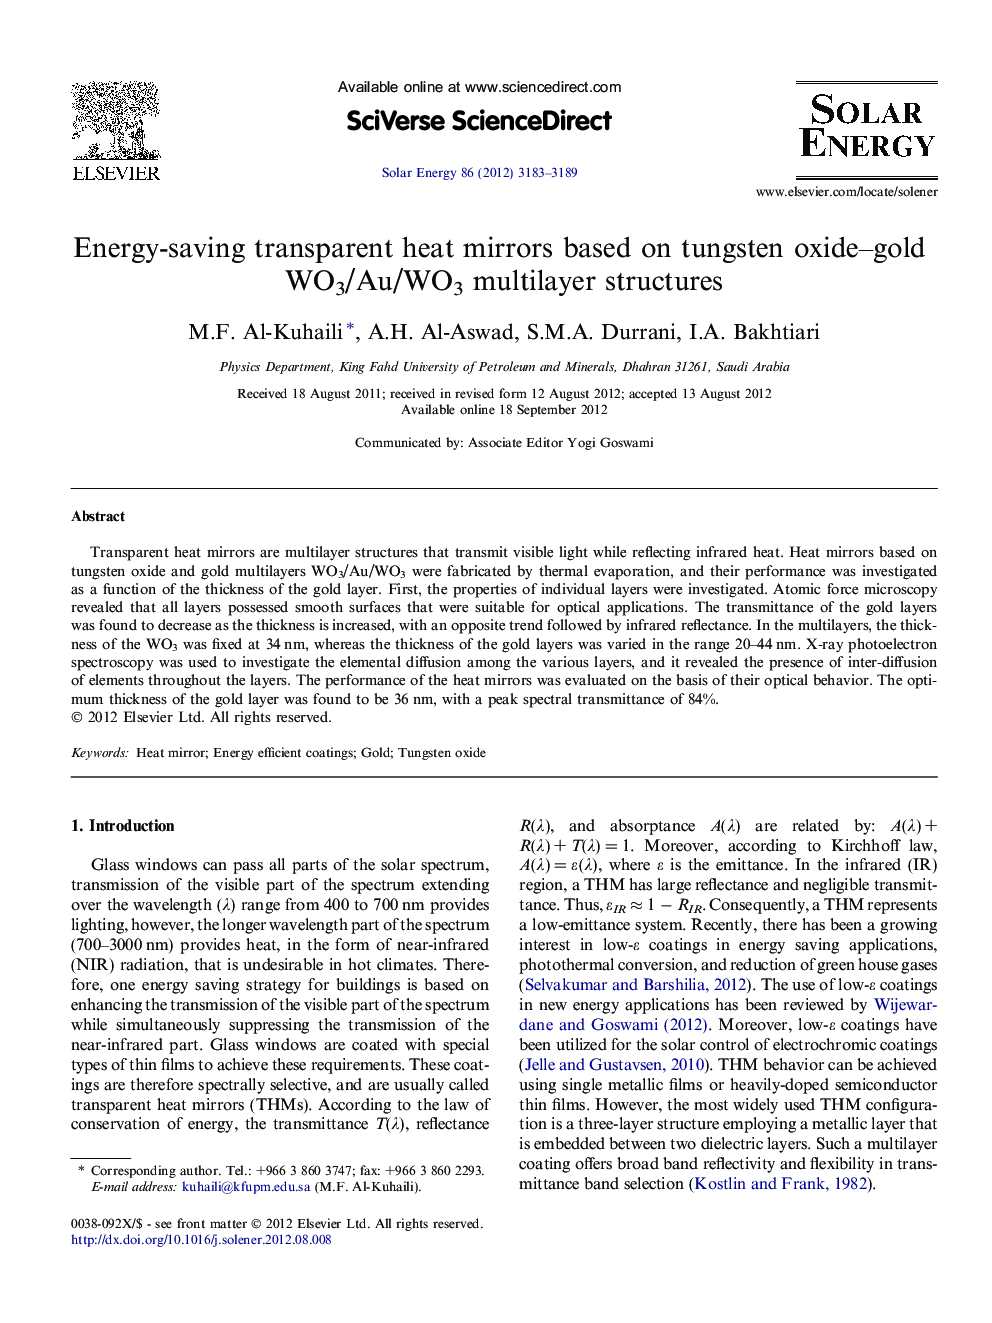 Energy-saving transparent heat mirrors based on tungsten oxide–gold WO3/Au/WO3 multilayer structures